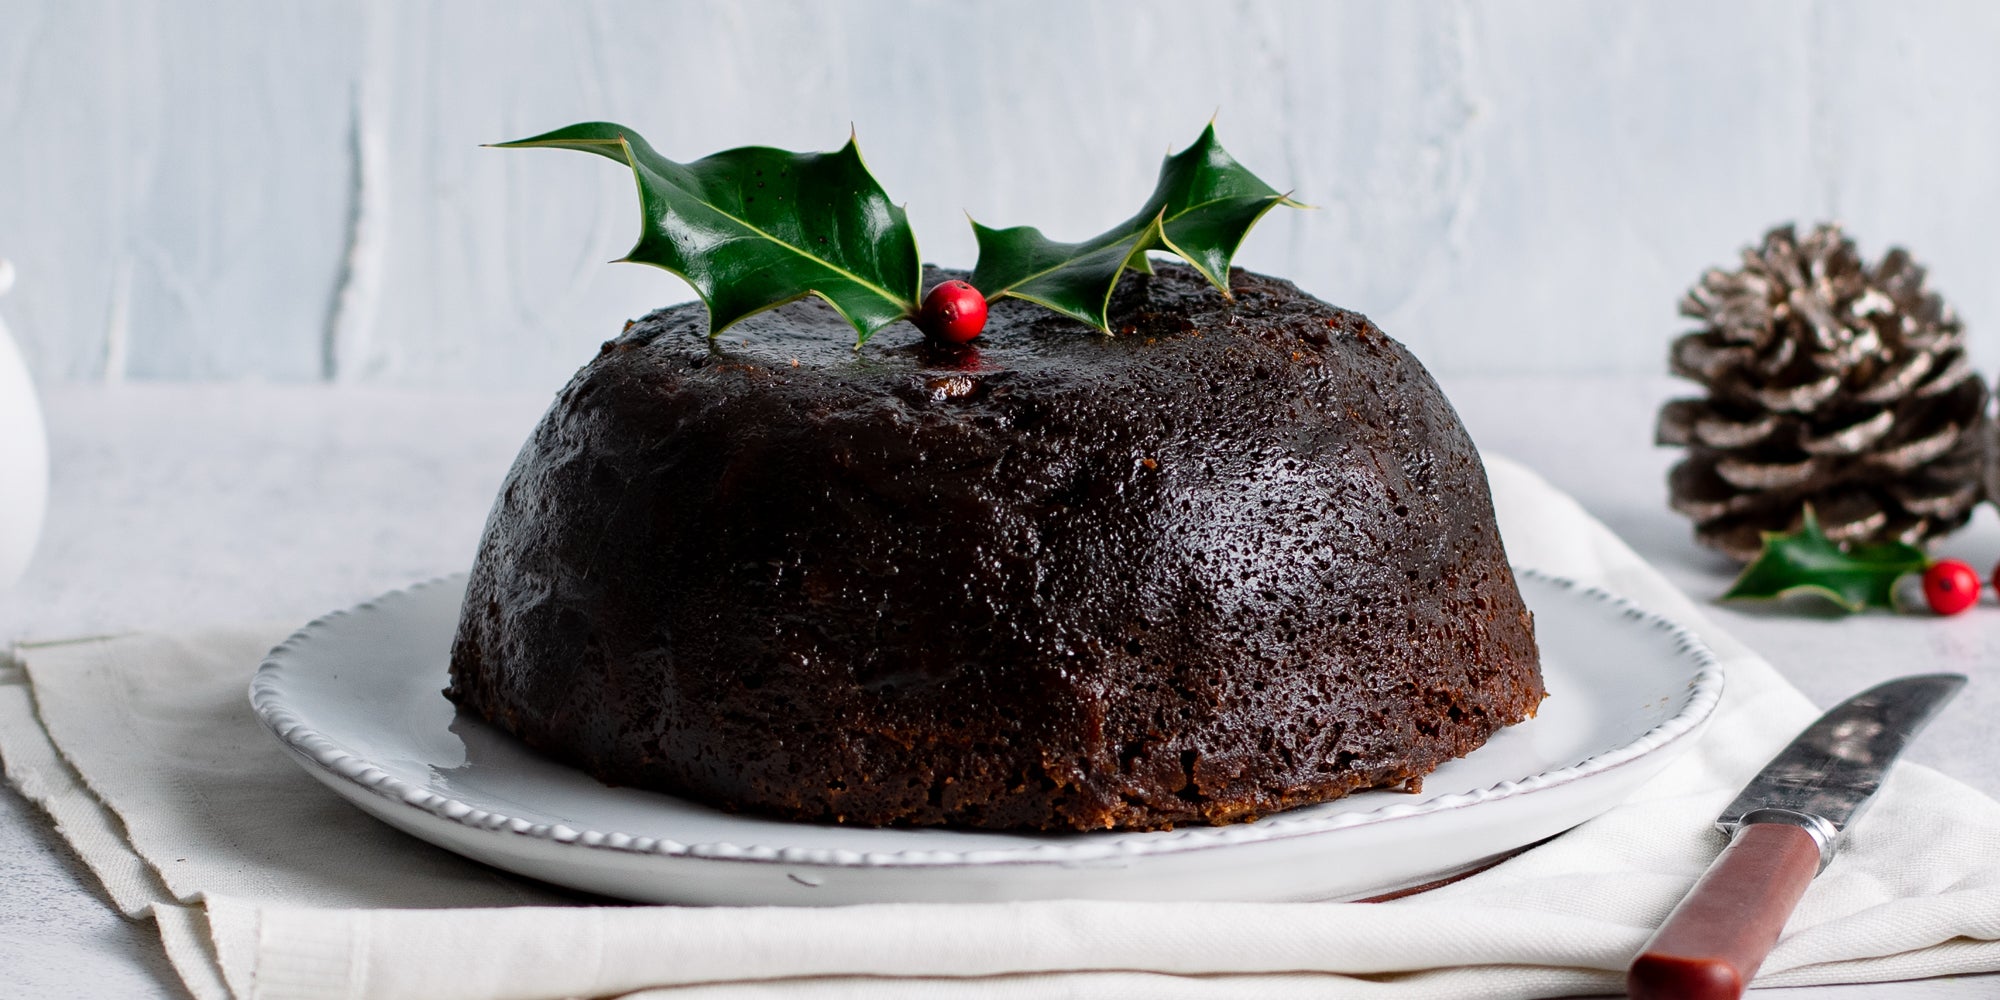 Last Minute Christmas Pudding without a topping, decorated with a piece of holly